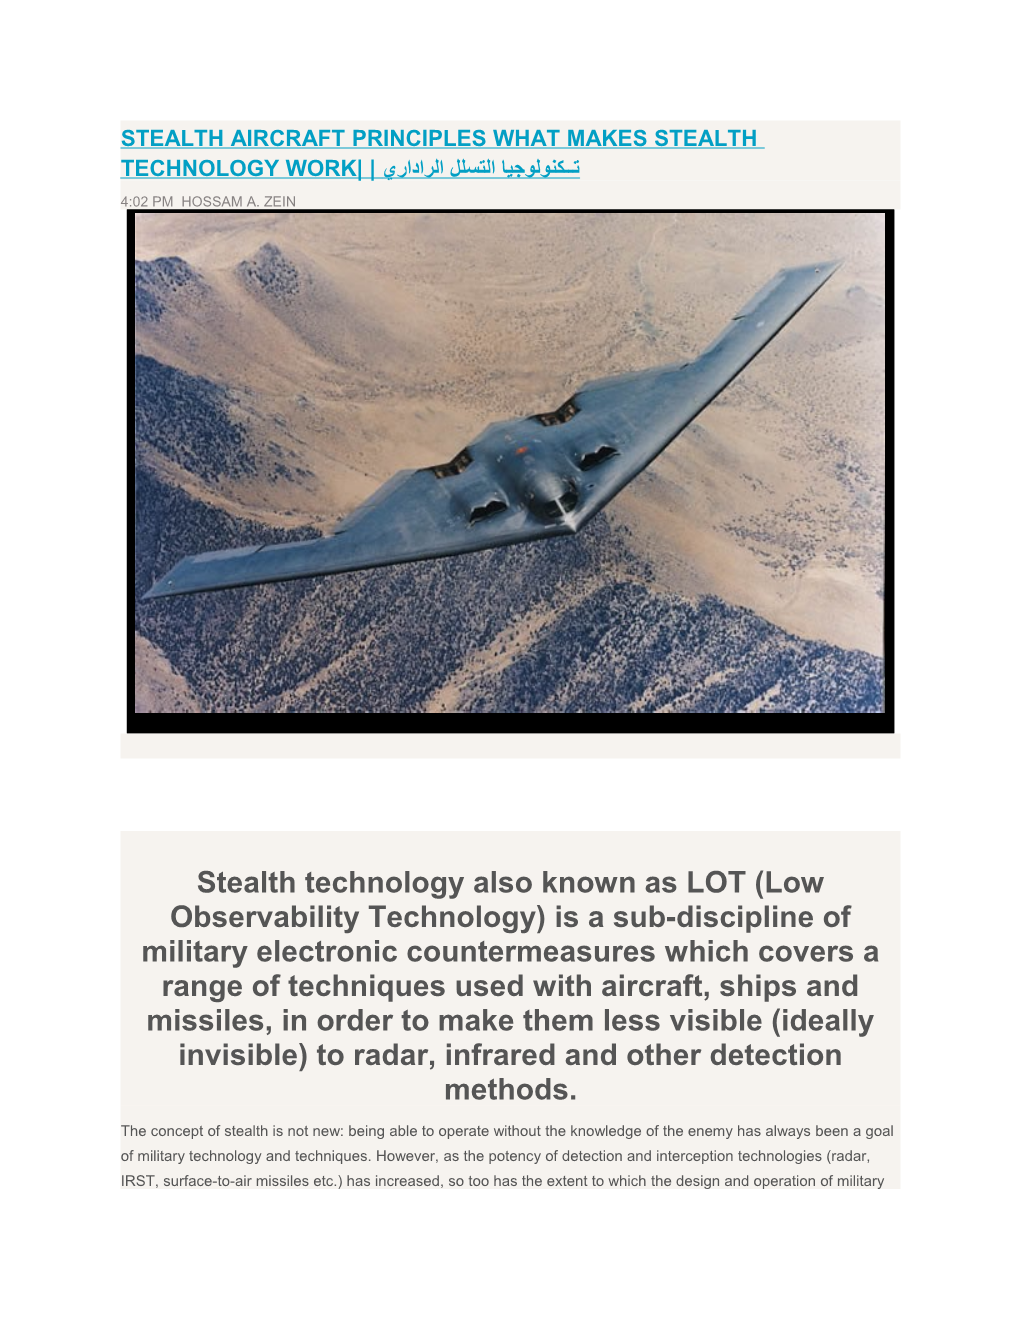 Stealth Aircraft Principles What Makes Stealth Technology Work تــكنولوجيا التسلل الراداري